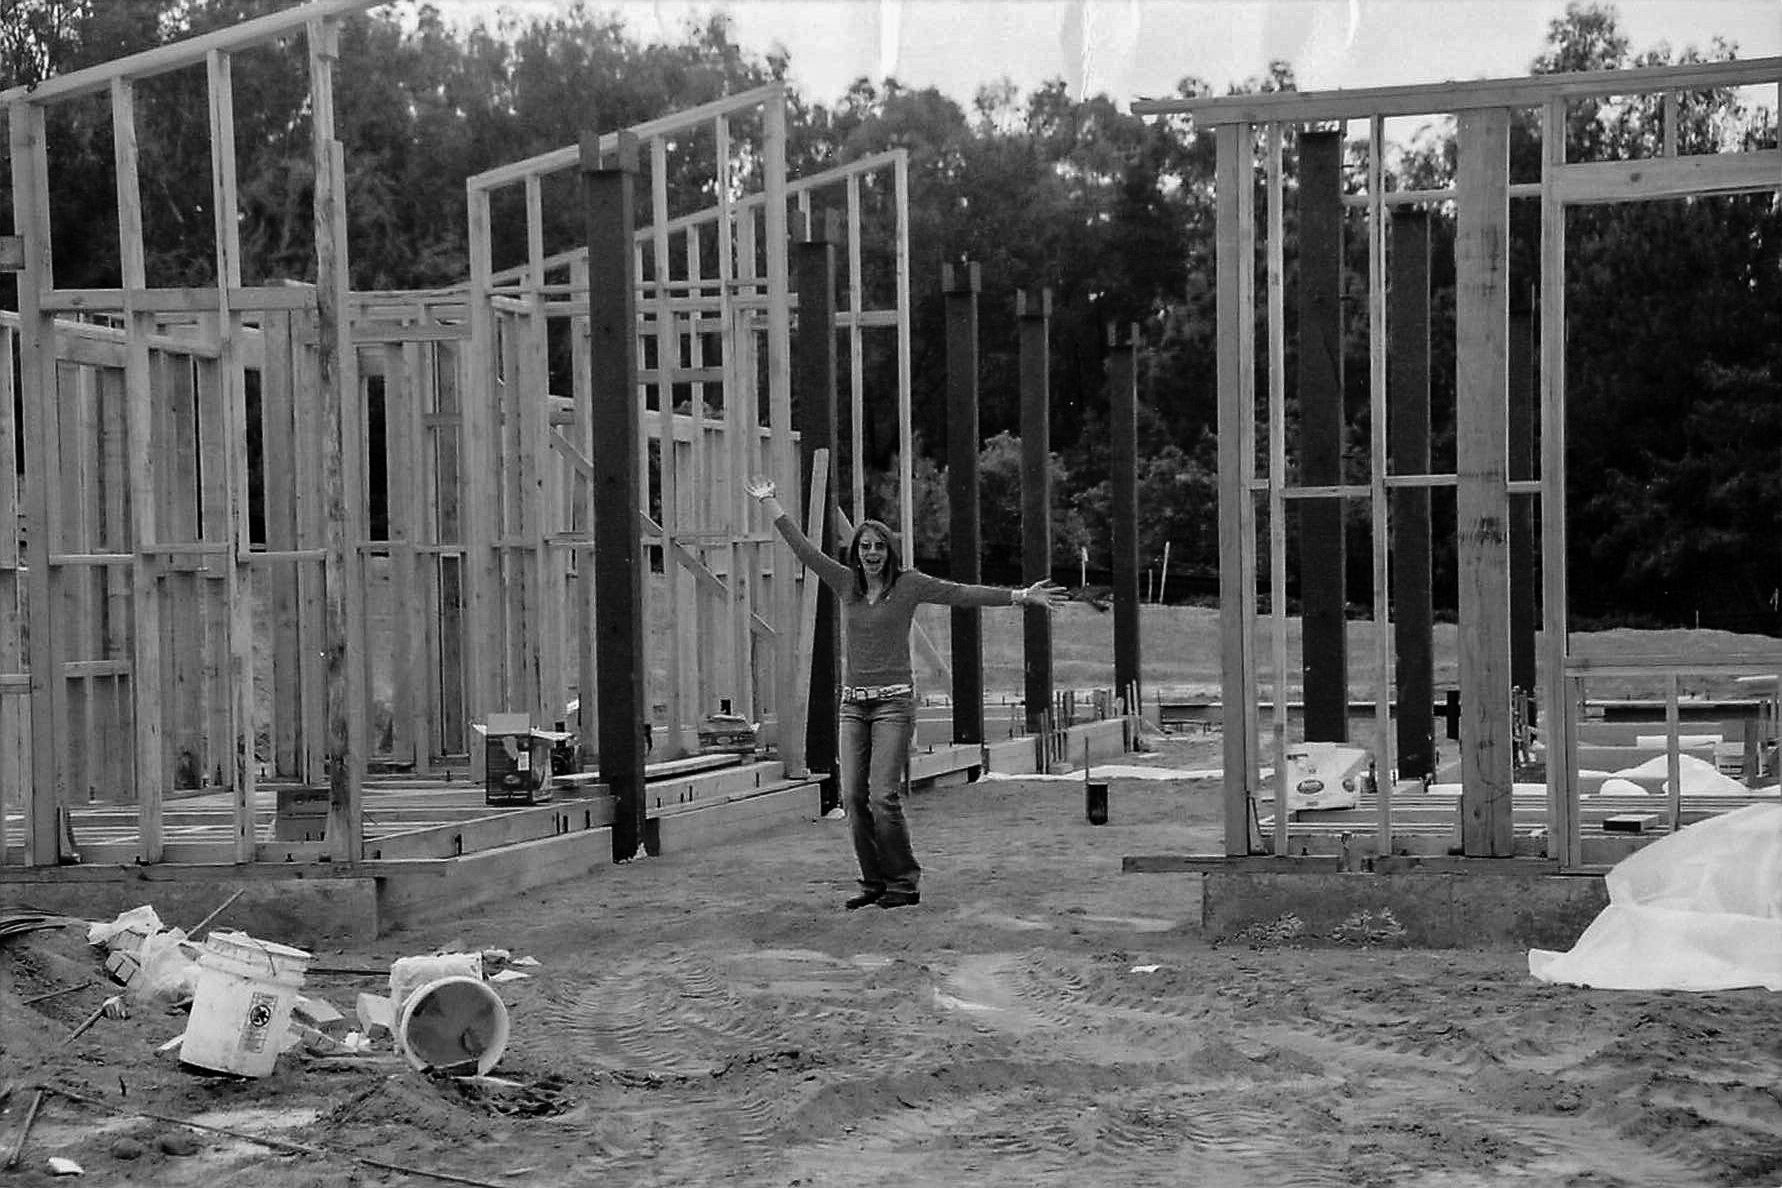 2001 - A few years after purchasing their land in the Covenant, they begin construction on their house and stable, the future home of The Cov.
